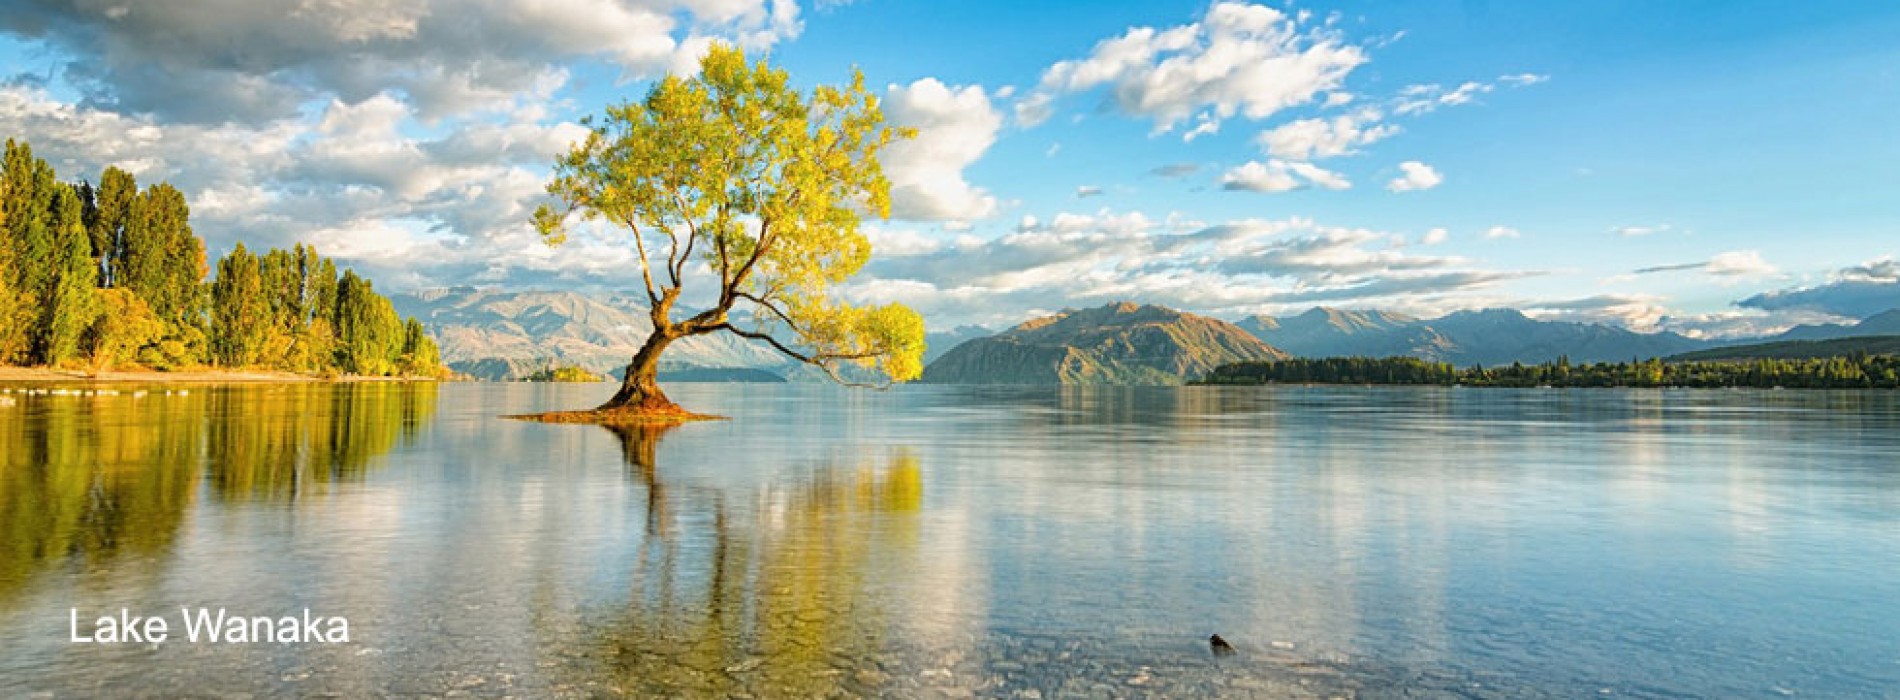 Most Shared Spots in New Zealand on Instagram in 2015